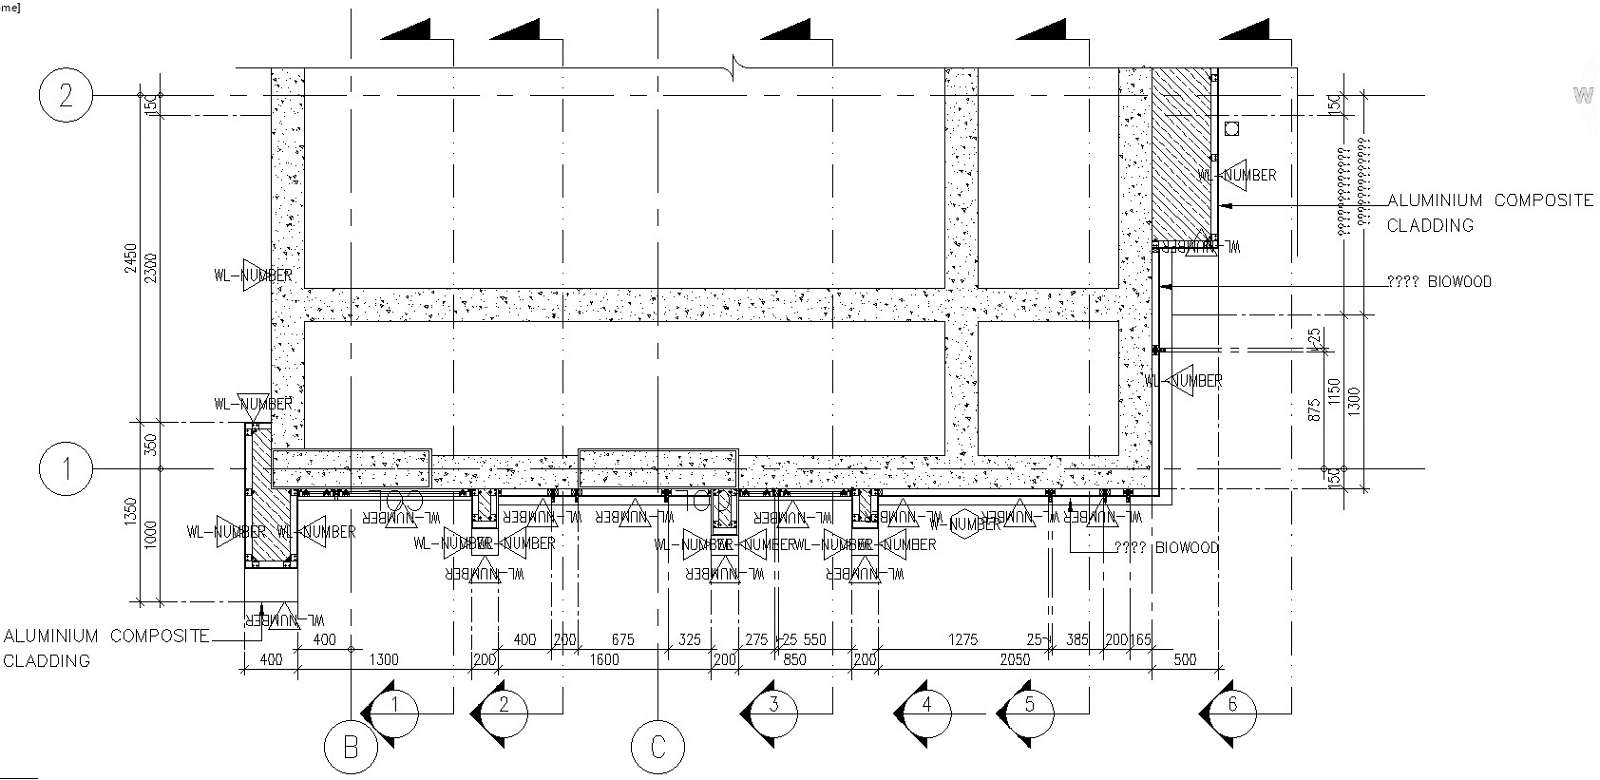 simple layout of bathroom details in AutoCAD, dwg file. - Cadbull